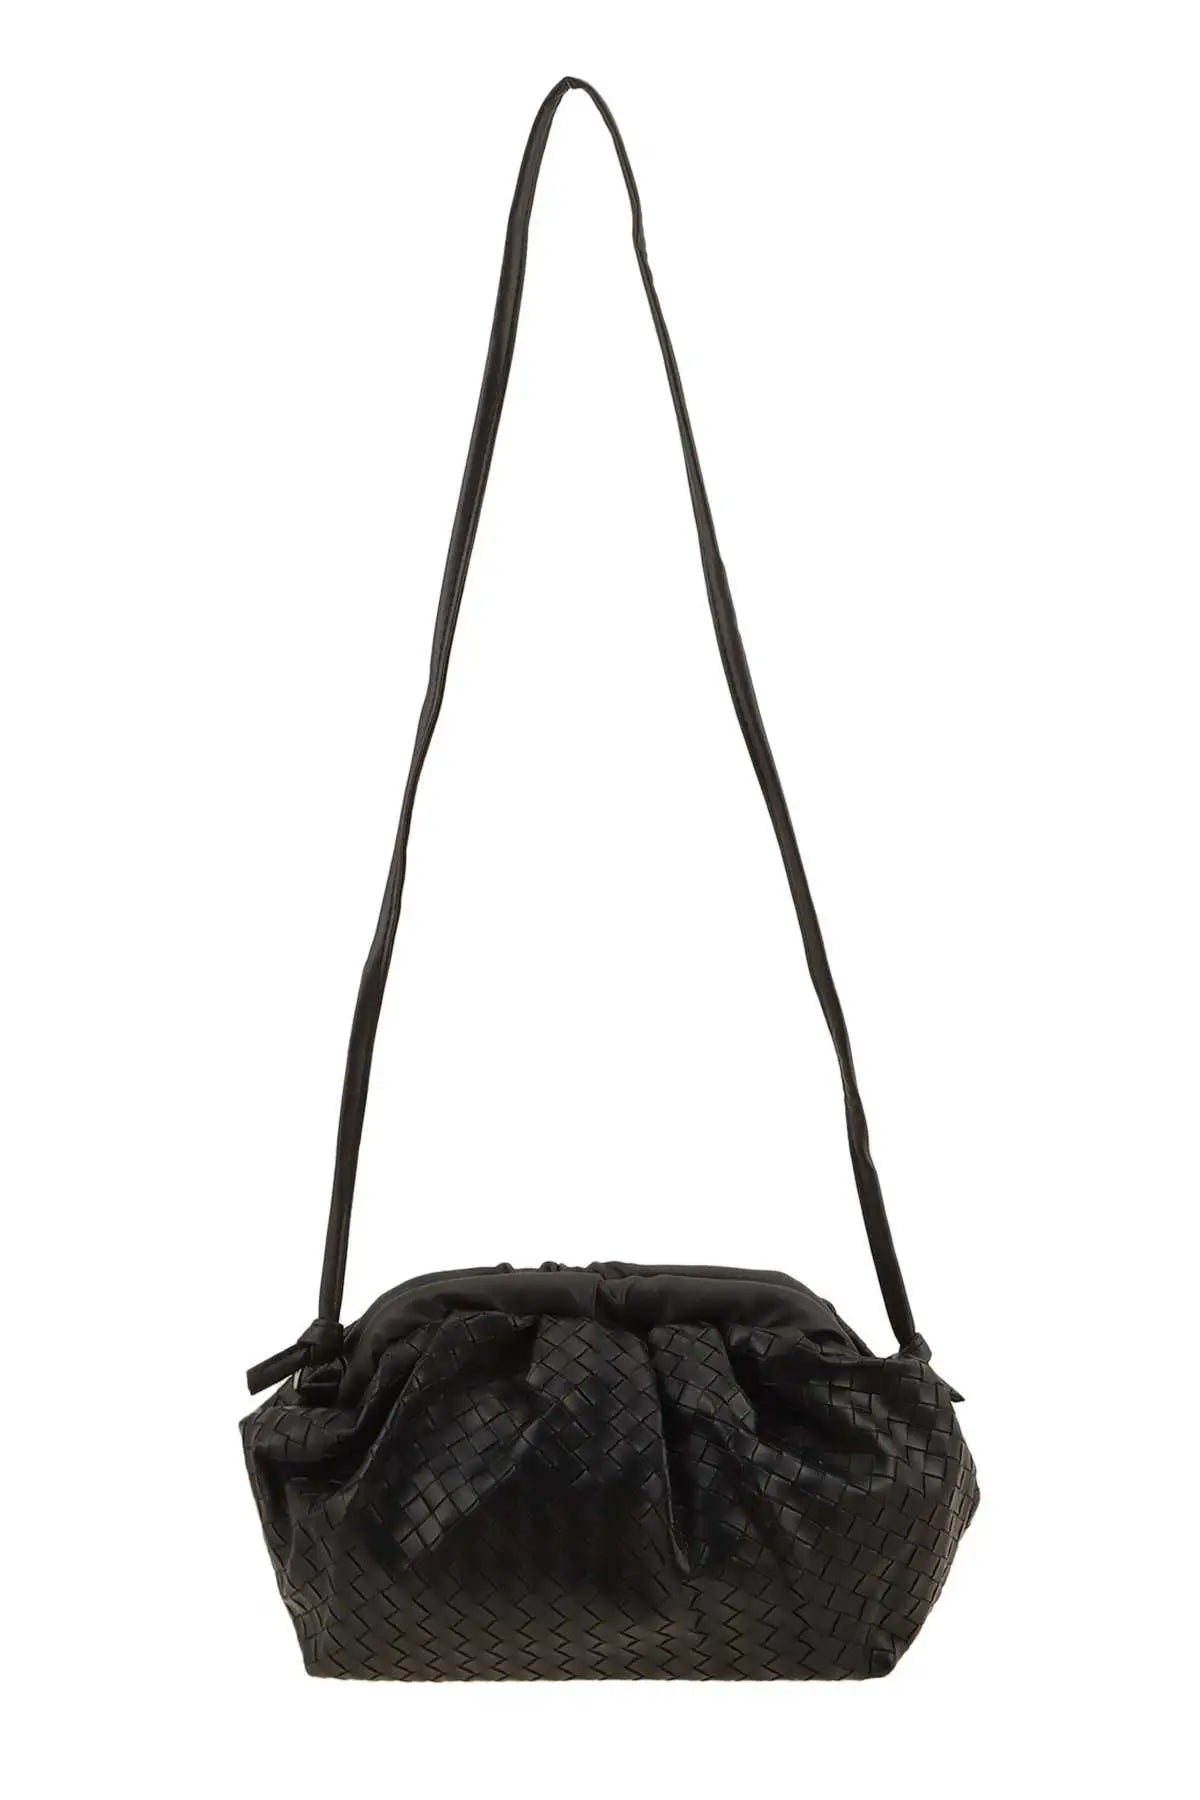 Load image into Gallery viewer, FADIVO NEW YORK Textured Crossbody Bag - black
